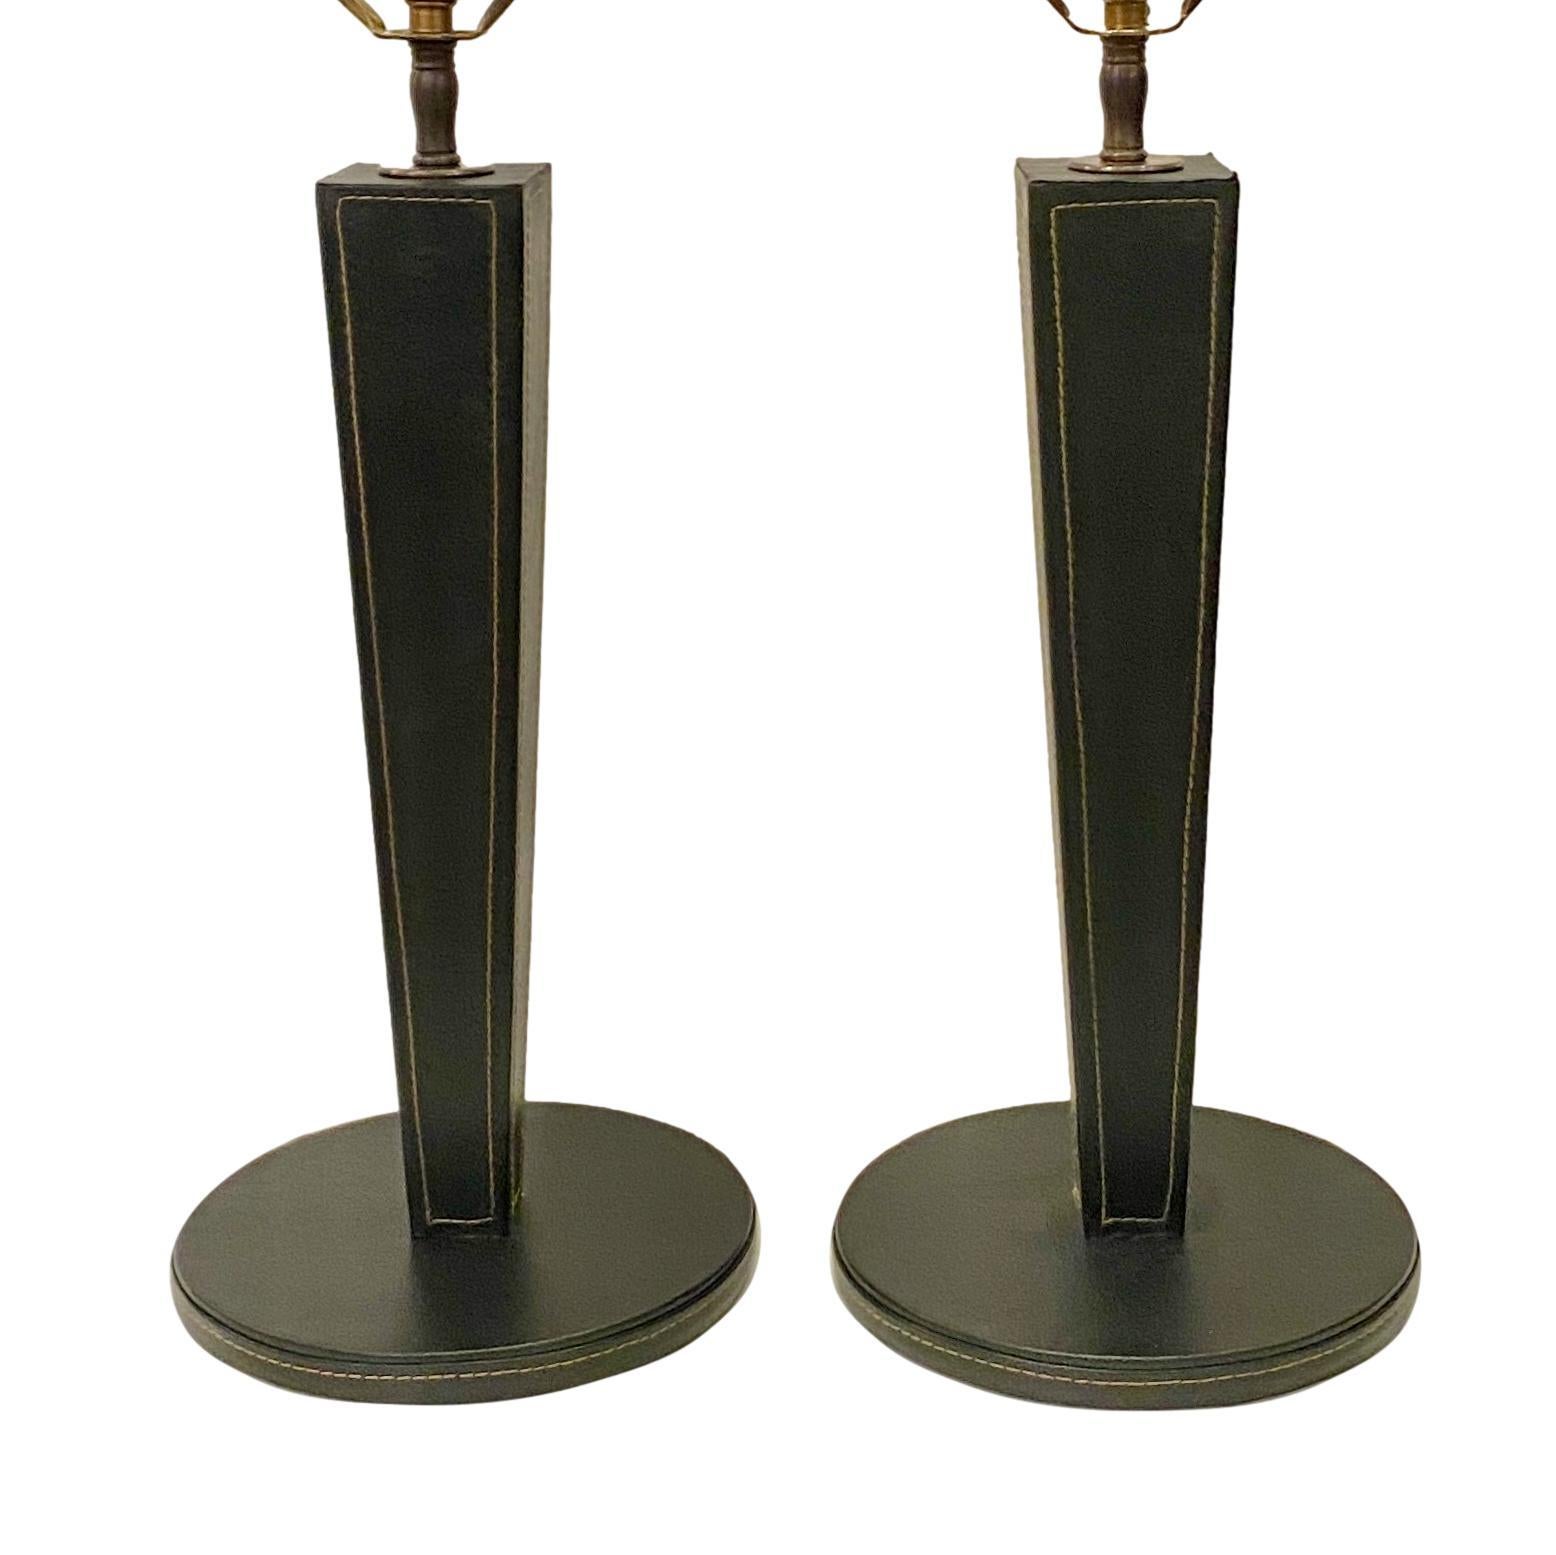 Pair of circa 1950's French leather bound table lamps.

Measurements:
Height of body: 15